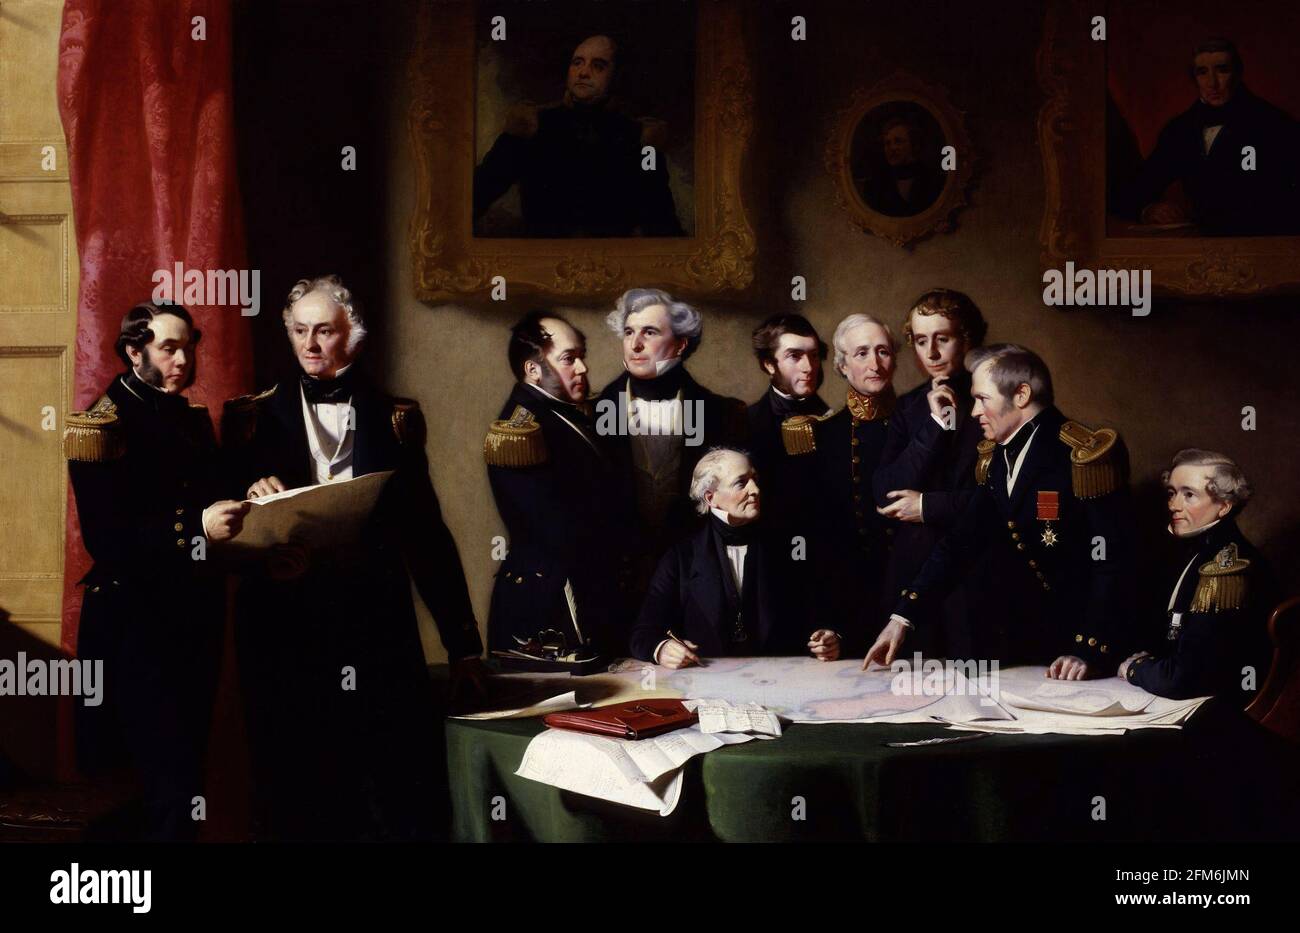 The Franklin Expedition. The Arctic Council planning a search for Sir John Franklin by Stephen Pearce, oil on canvas, 1851. From left to right, George Back, William Edward Parry, Edward Joseph Bird, James Clark Ross, Francis Beaufort, John Barrow Jr., Edward Sabine, William Alexander Baillie Hamilton, John Richardson, Frederick William Beechey Stock Photo